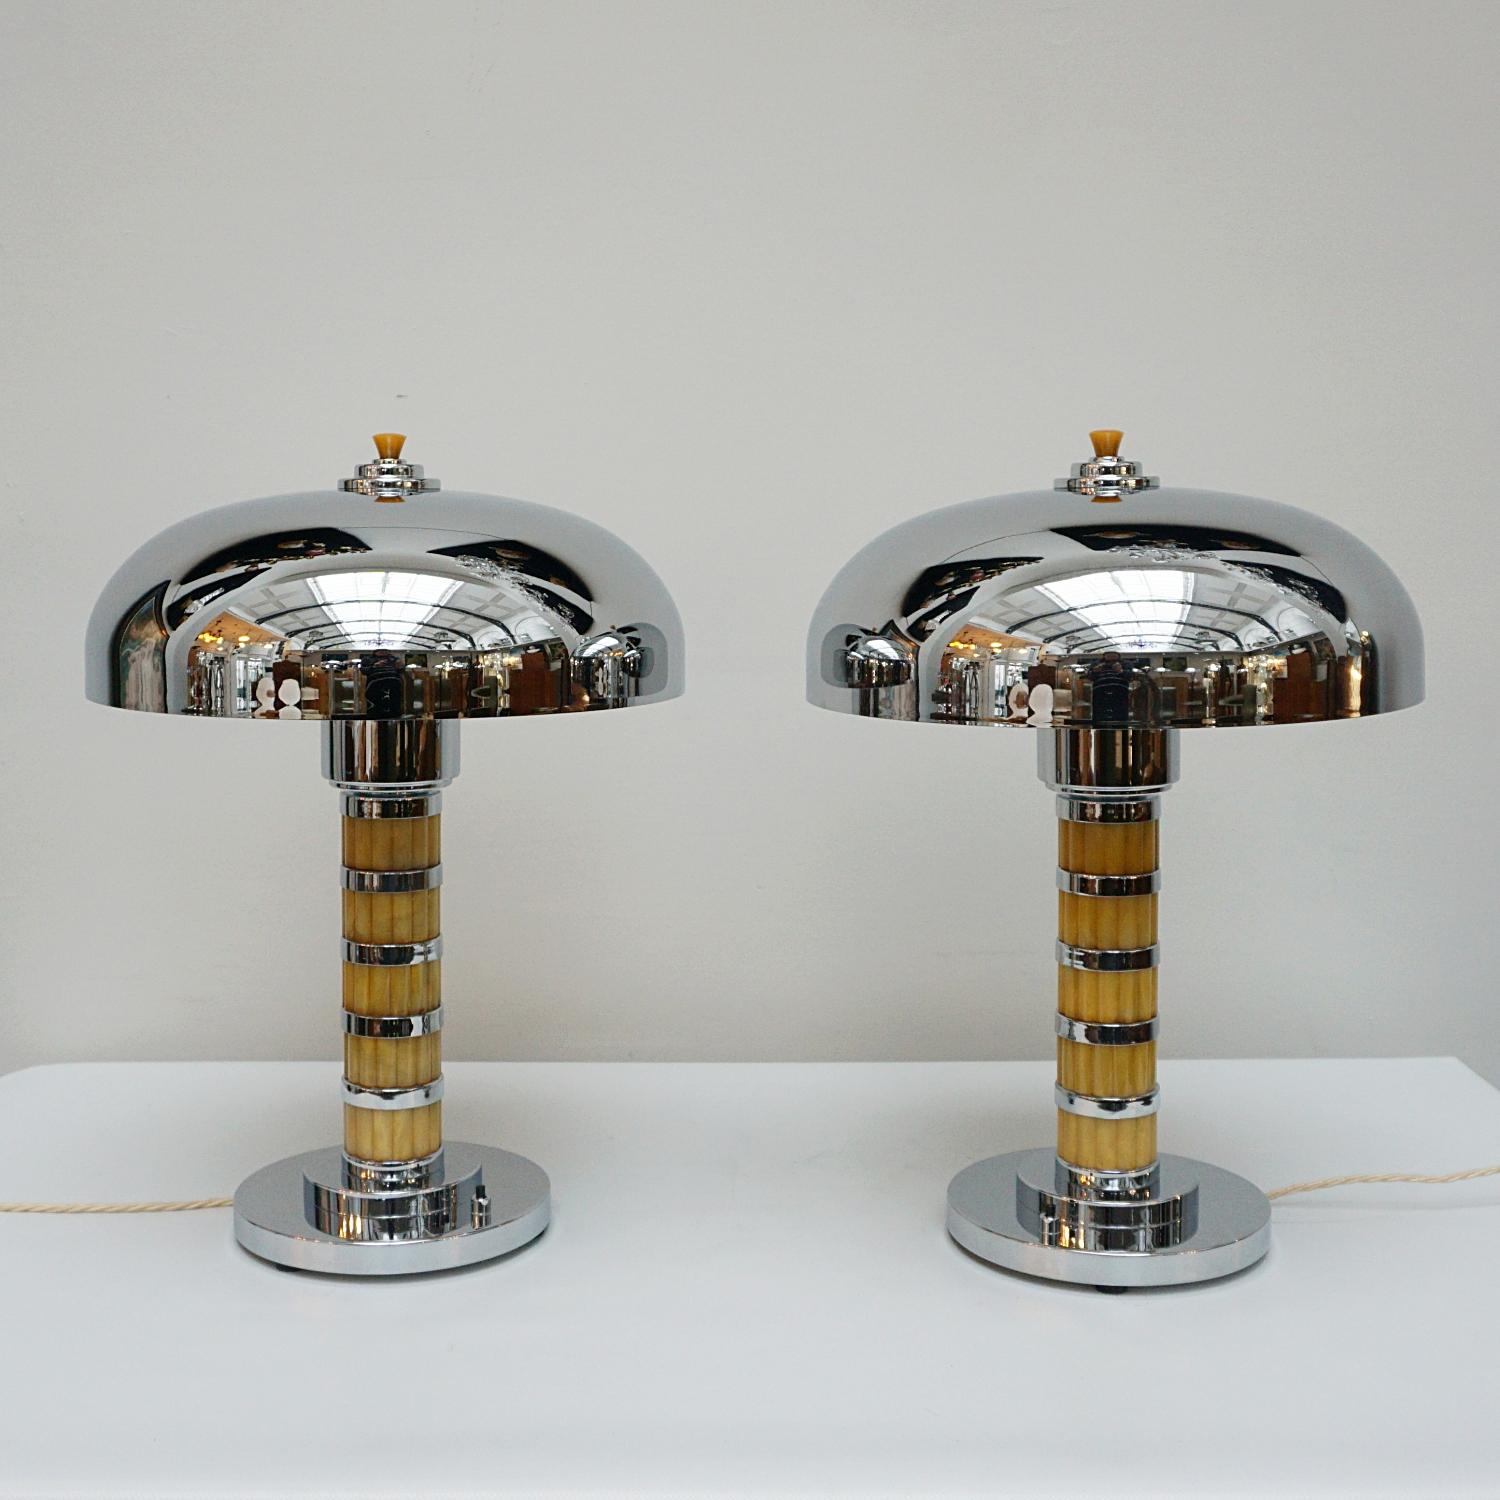 A pair of Art Deco style dome lamps. Yellow fluted bakelite stem with chrome banding, over a chromed metal circular base and a chromed metal shade. Chrome finial to top. 

Dimensions: H 50cm W 20cm, Depth of Shade: 38cm

Origin: English

Item